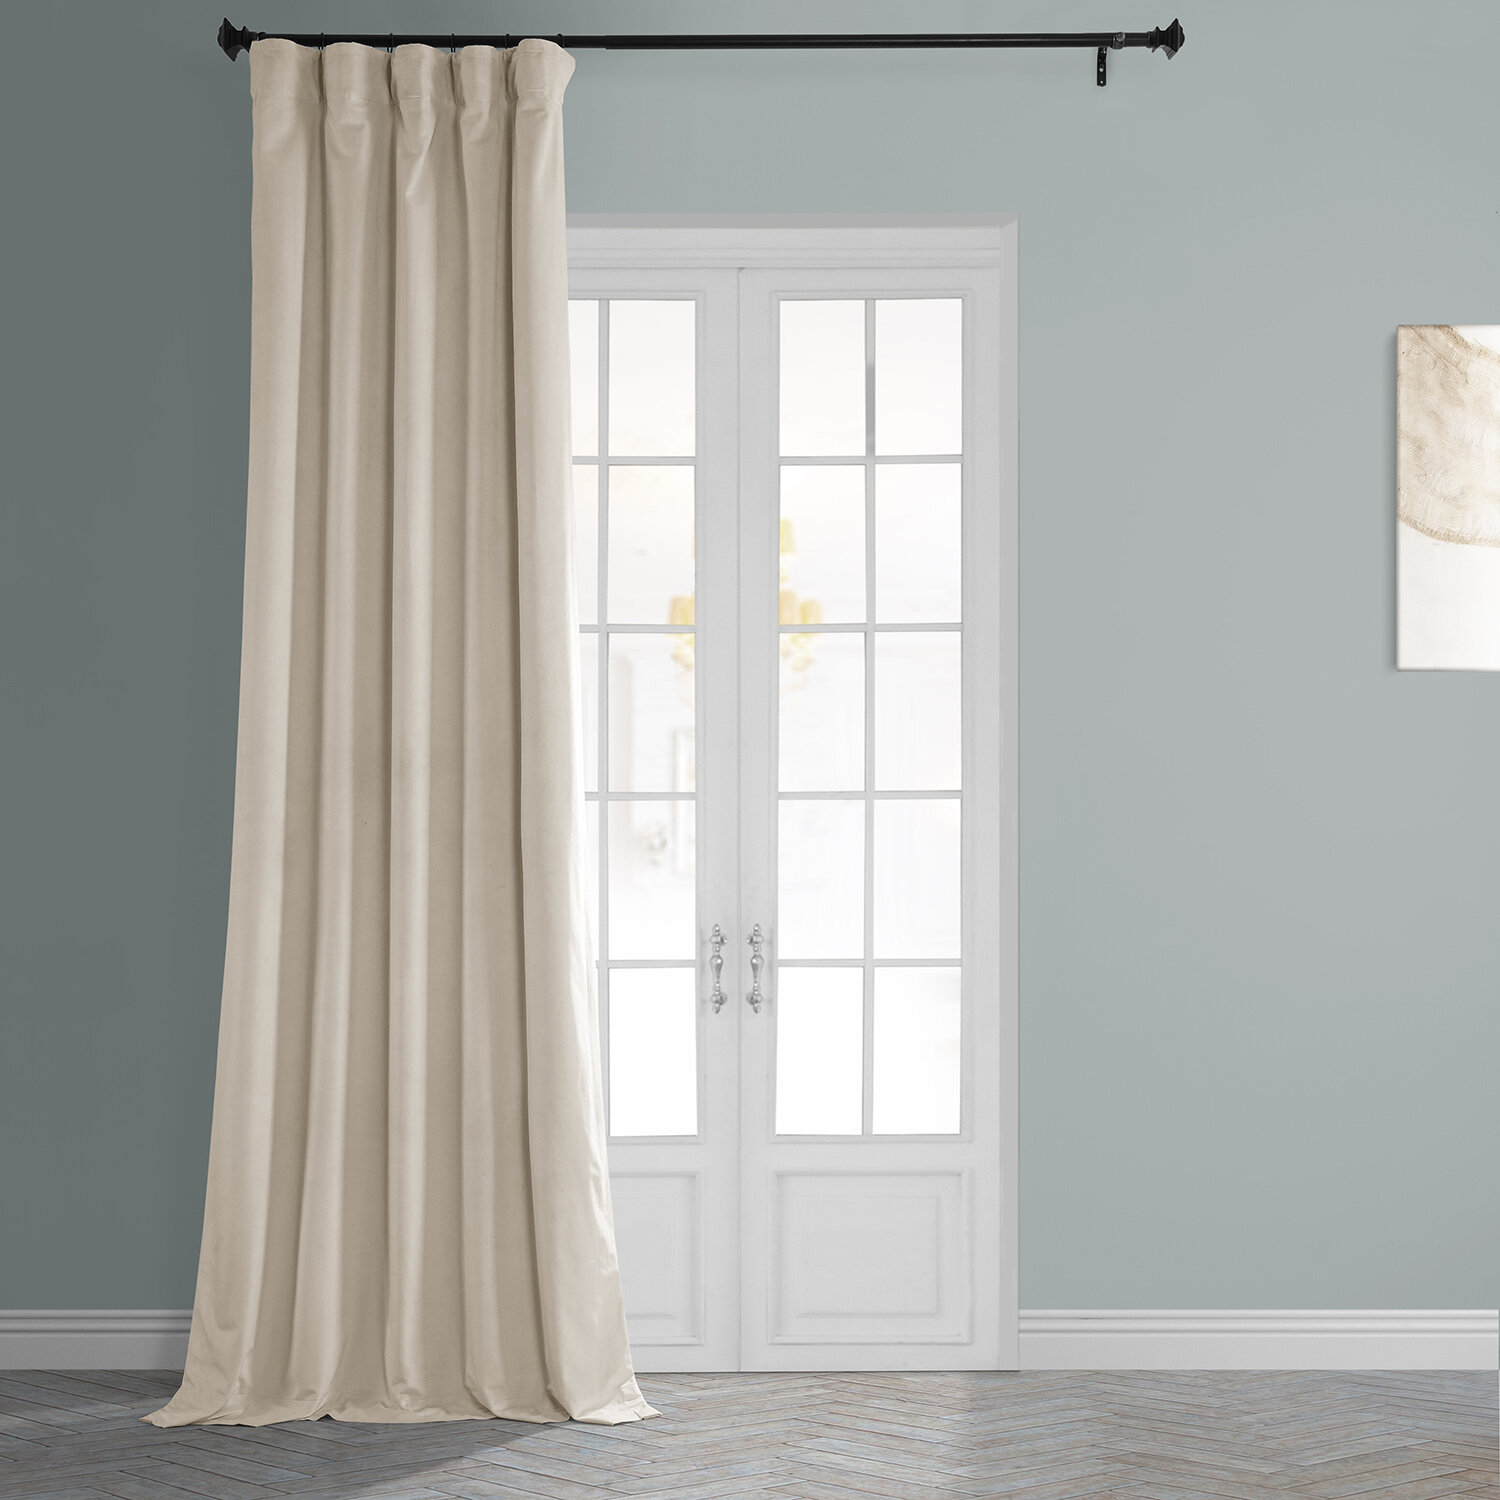 subrtex Semi Sheer Curtain Blackout Voile Draperies Window Treatment for Living Room/Kitchen,Set of 2 Panels Beige,52 Wx 63 H 